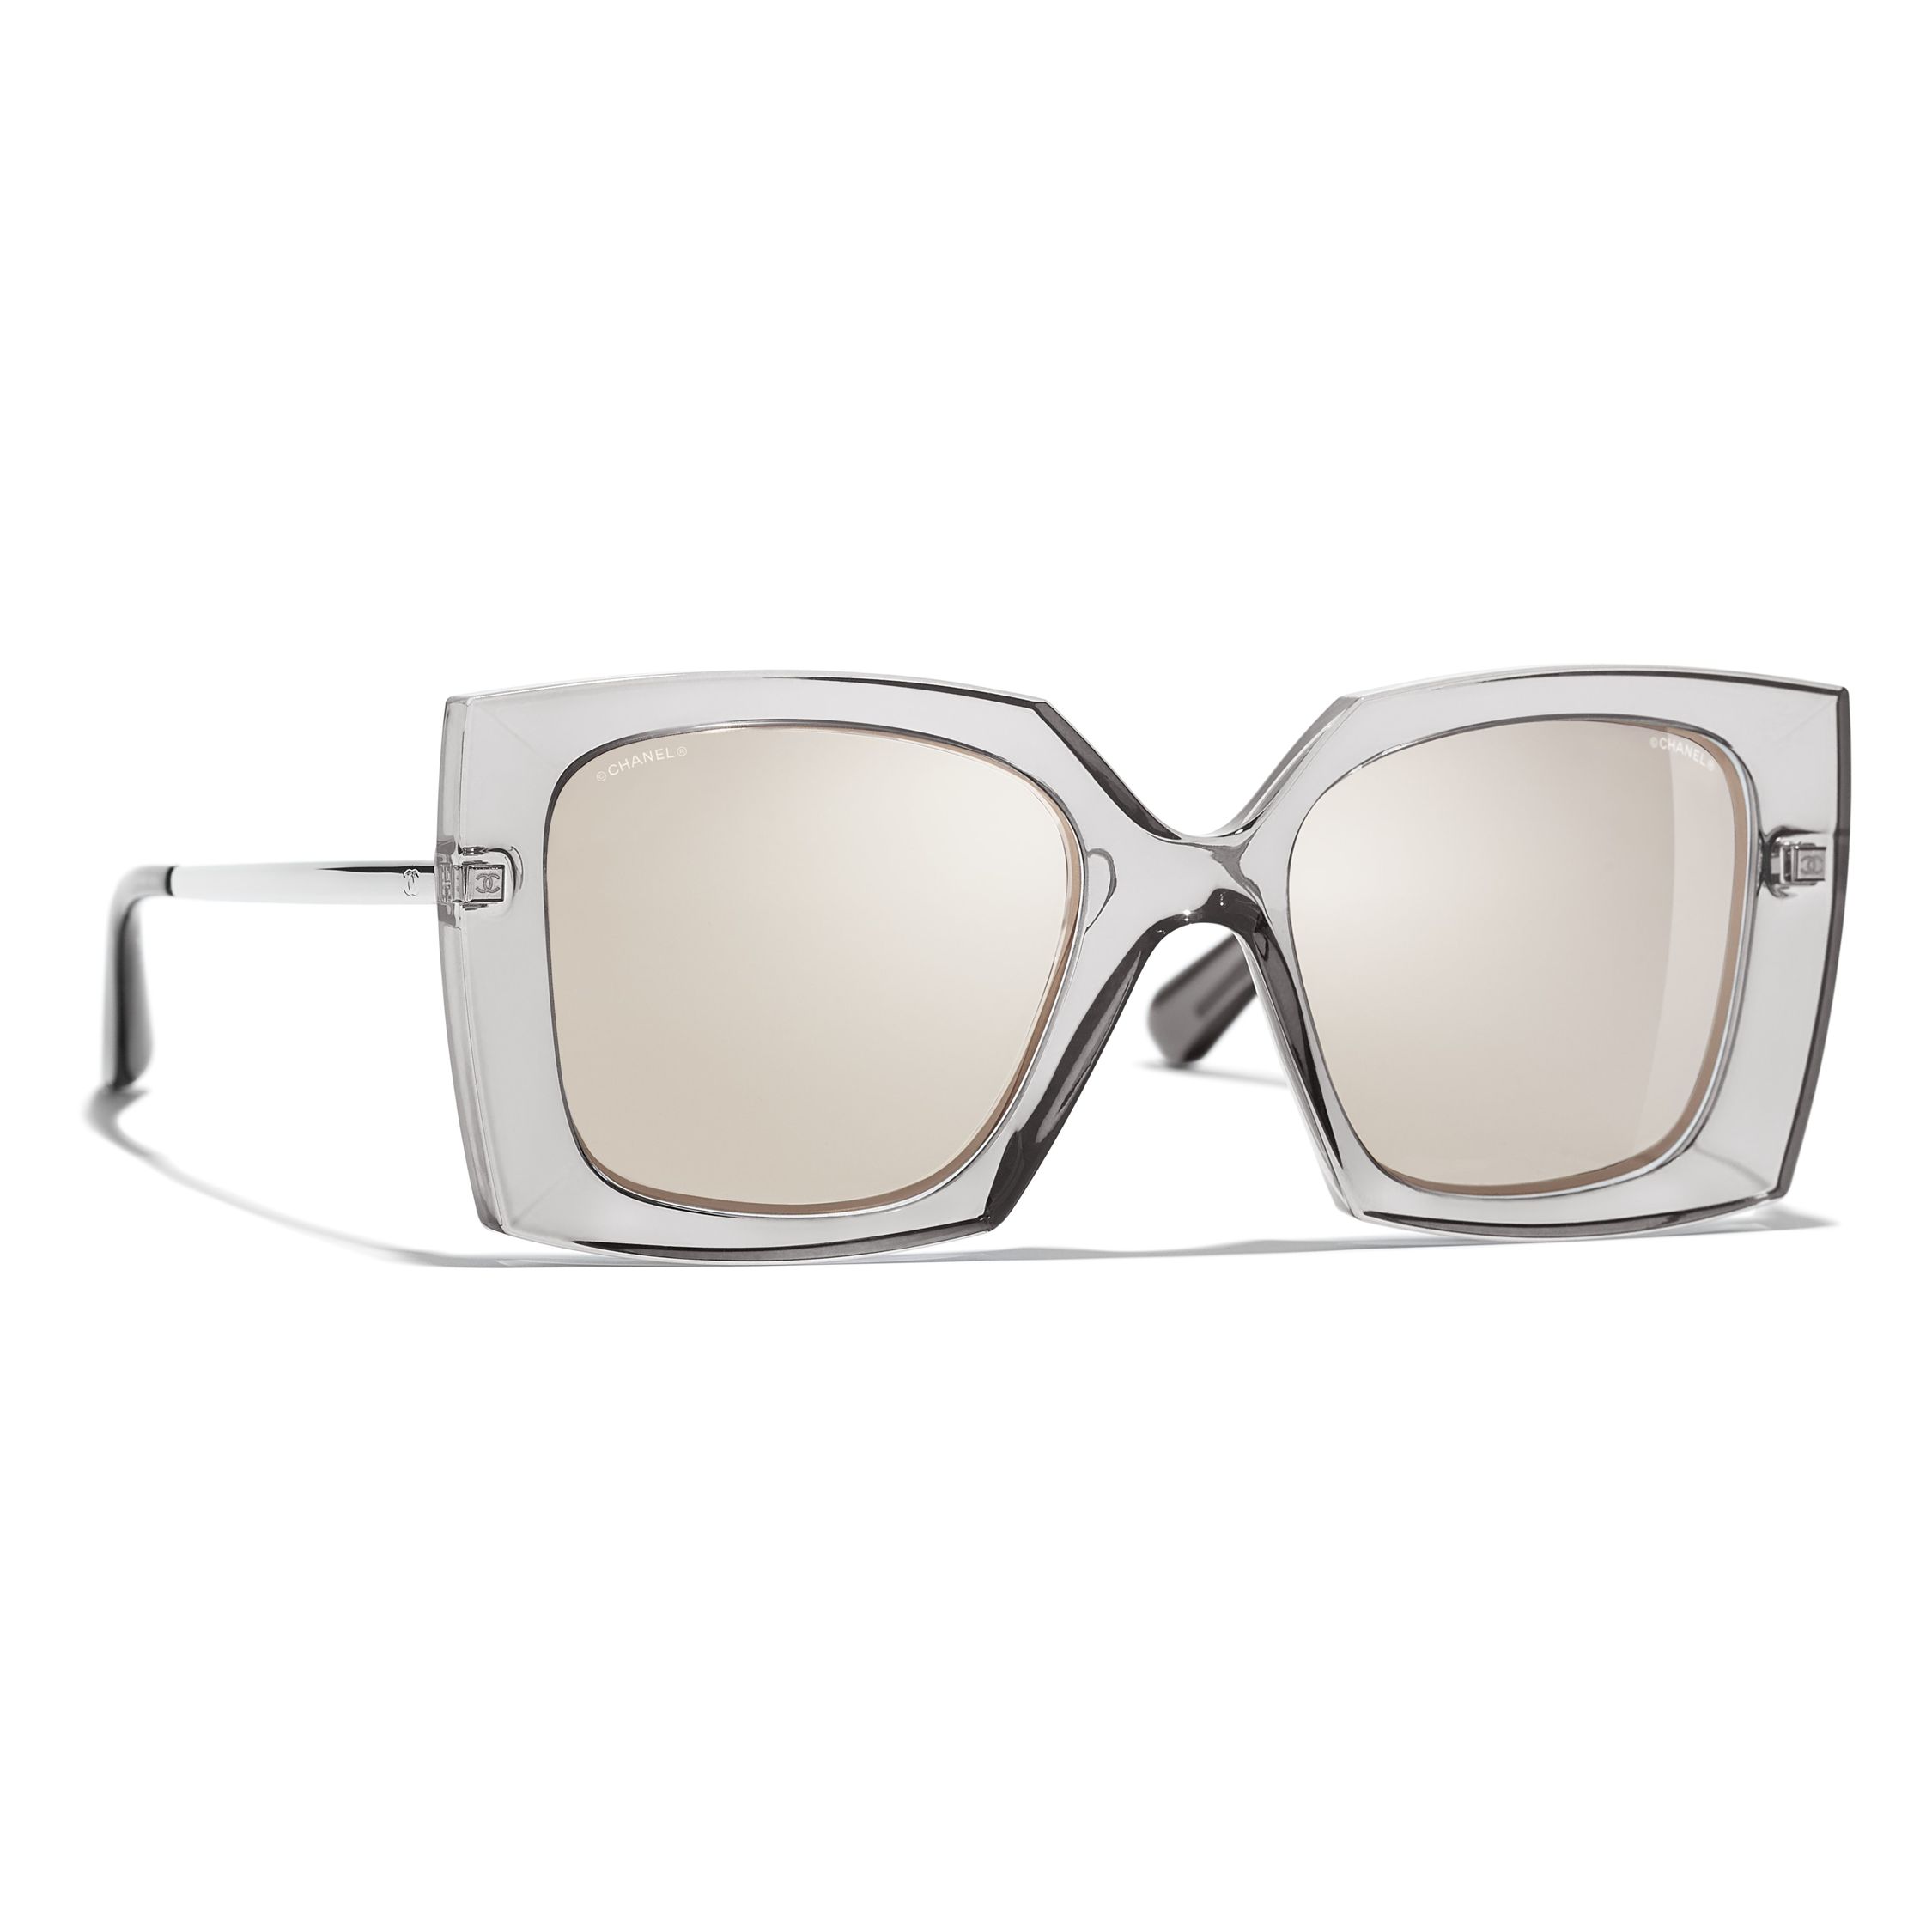 CHANEL Square Sunglasses CH6051 Grey/Mirror Clear at John Lewis & Partners